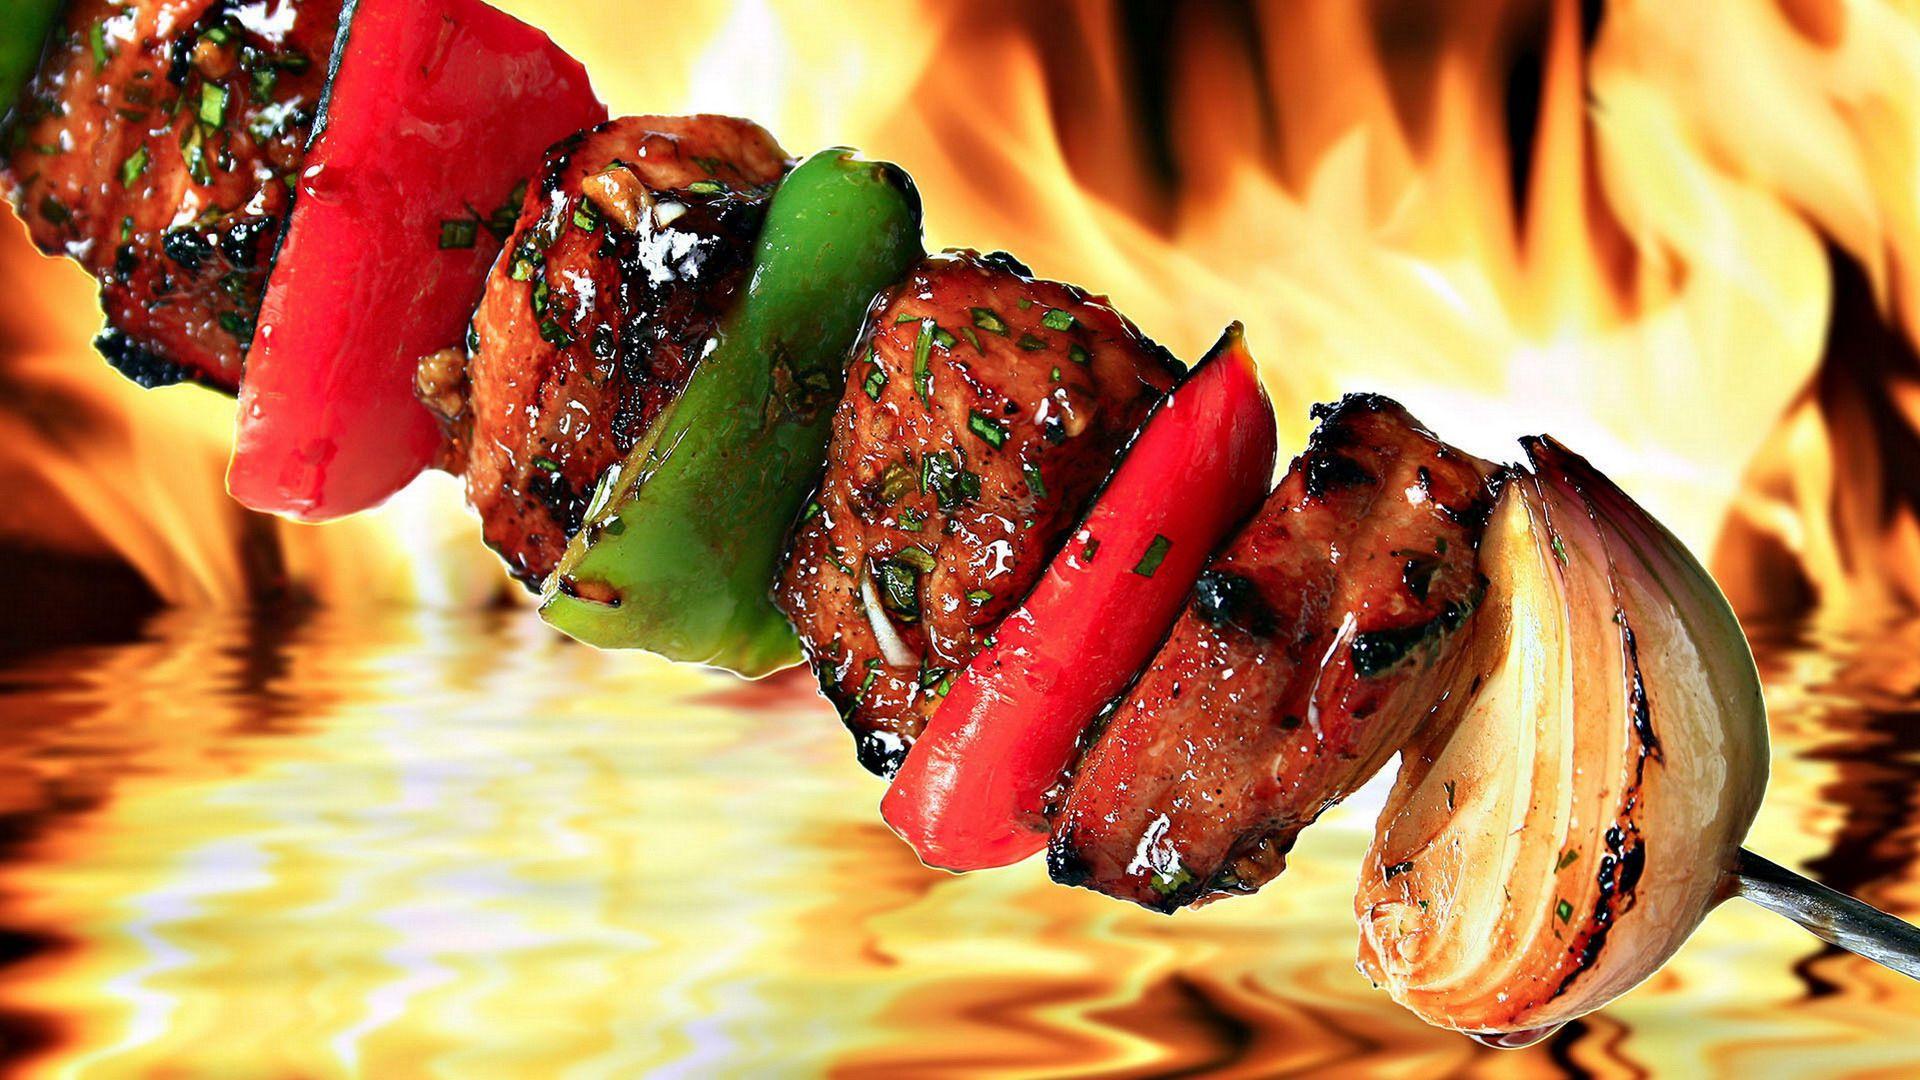 Barbecue Wallpaper, Best & Inspirational High Quality Barbecue